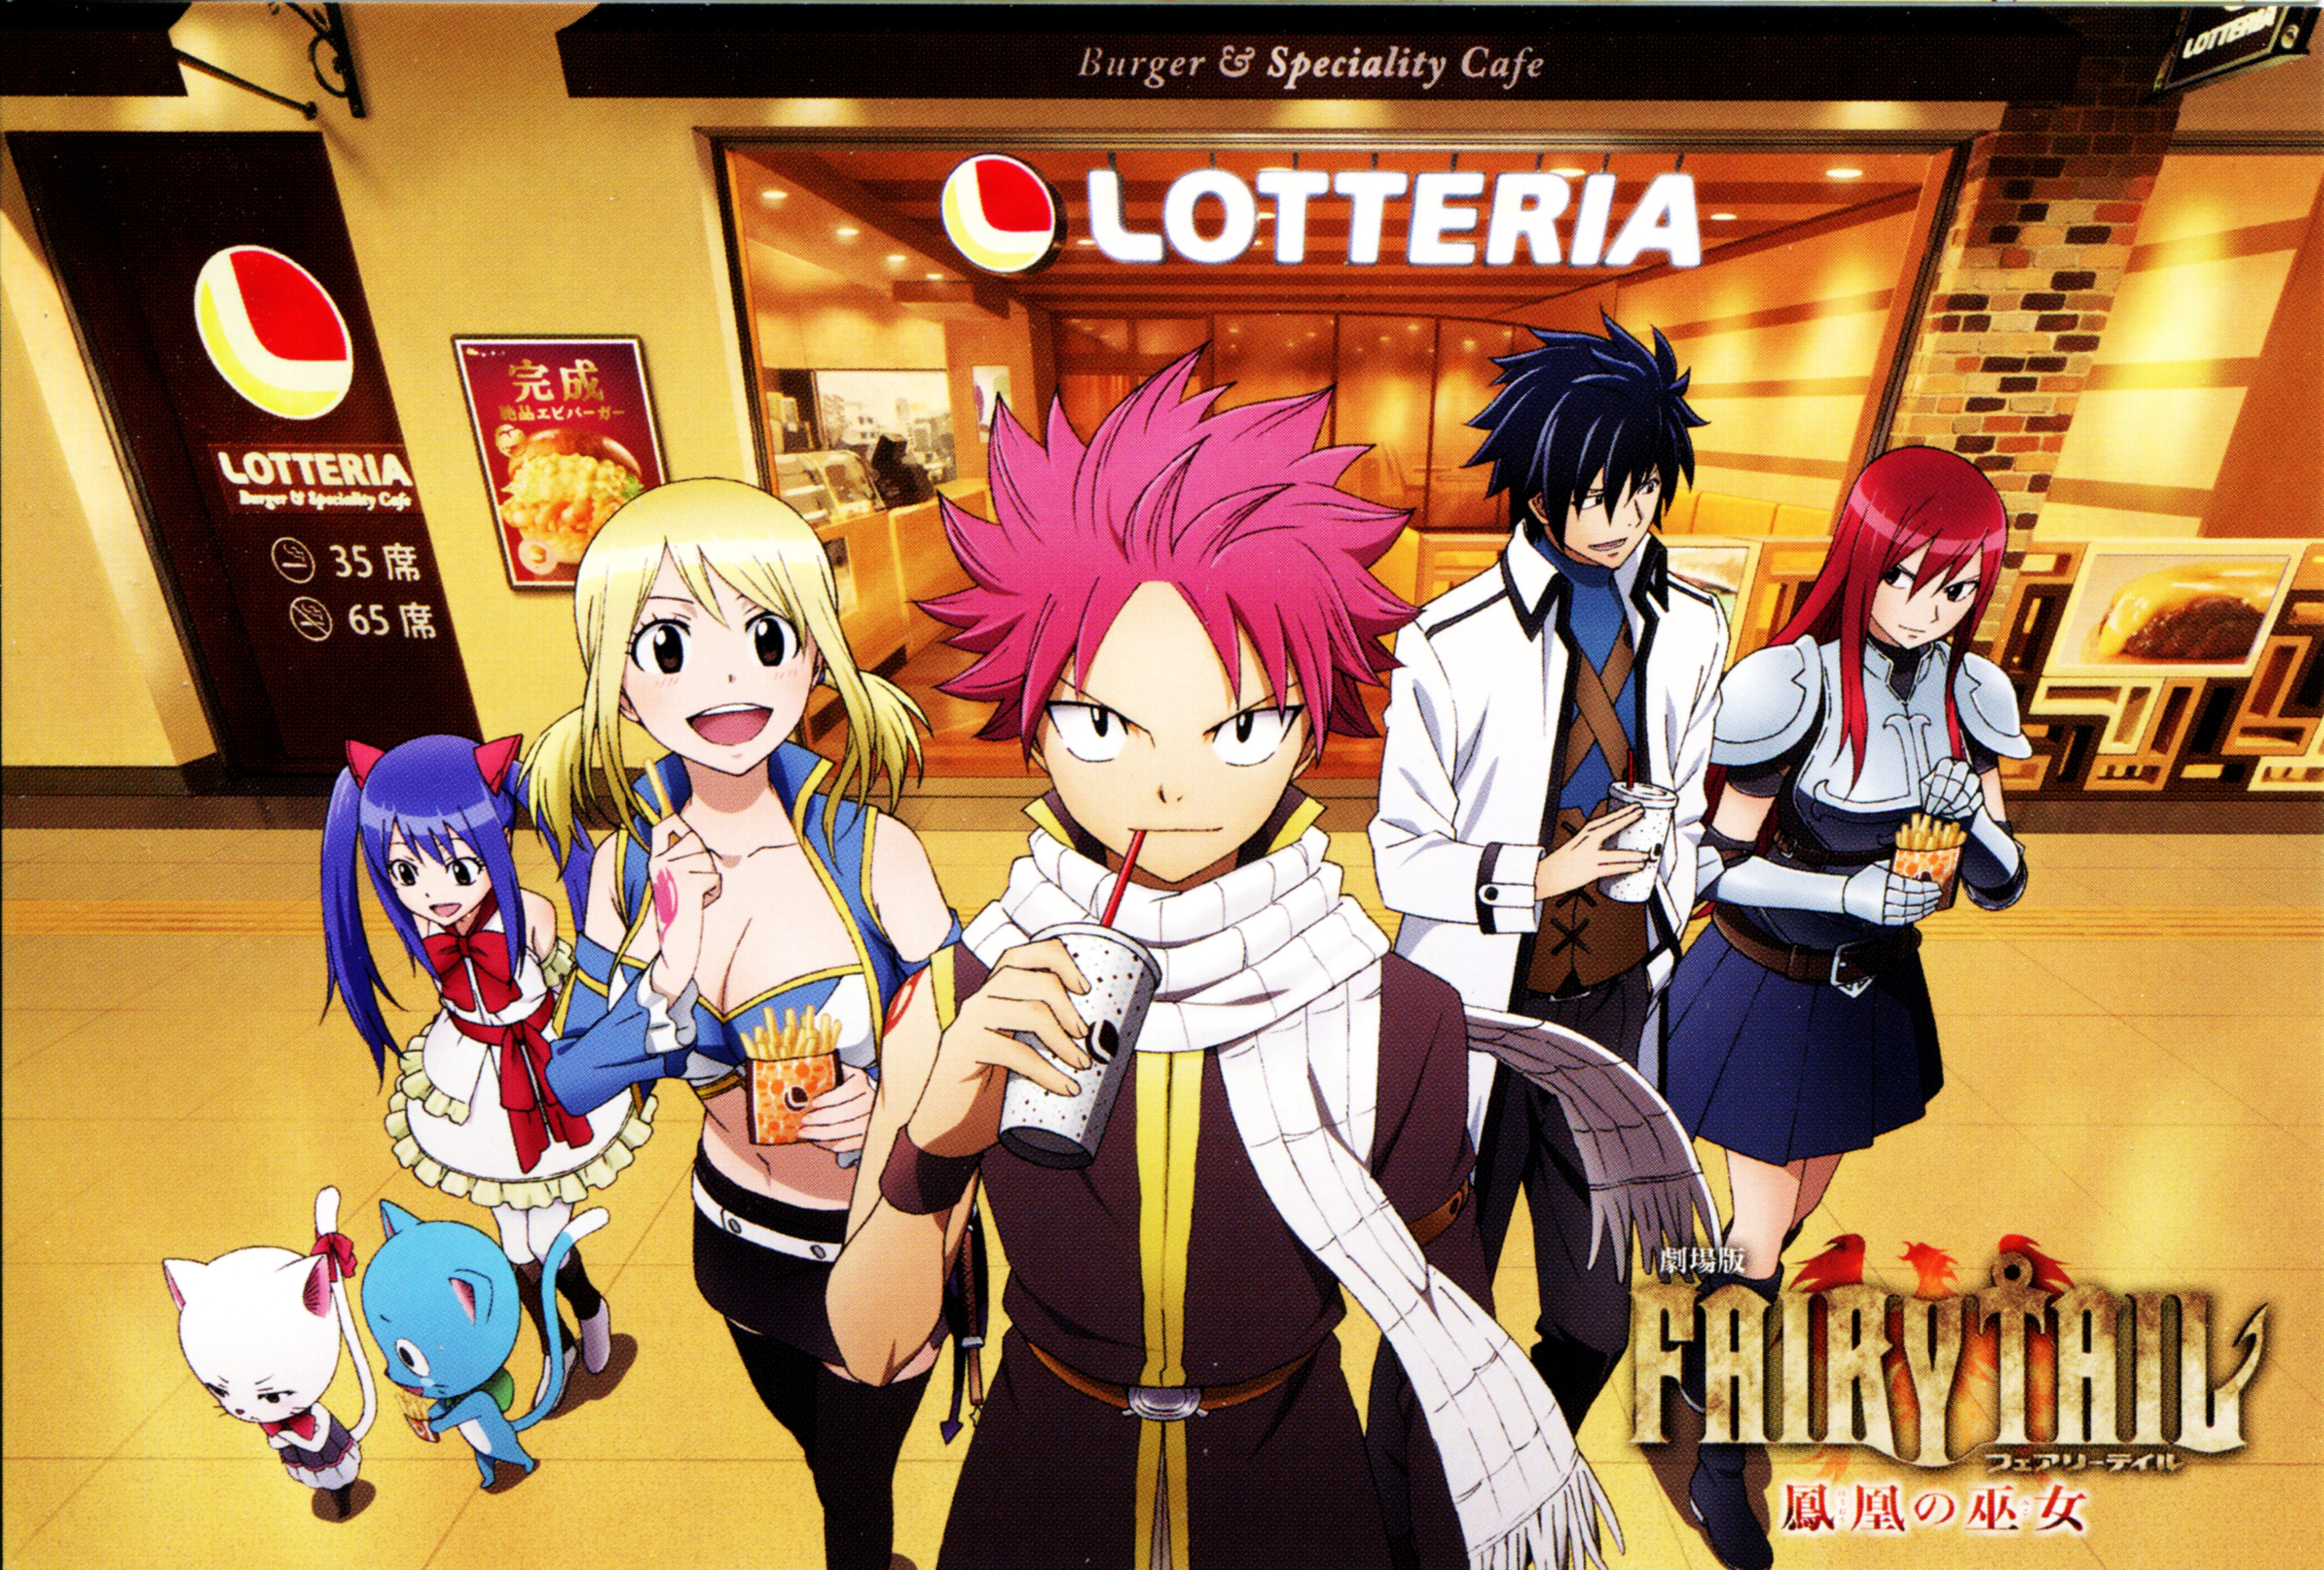 Charles Fairy Tail Erza Scarlet Gray Fullbuster Happy Fairy Tail Lucy Heartfilia Natsu Dragneel Wend 3492x2359